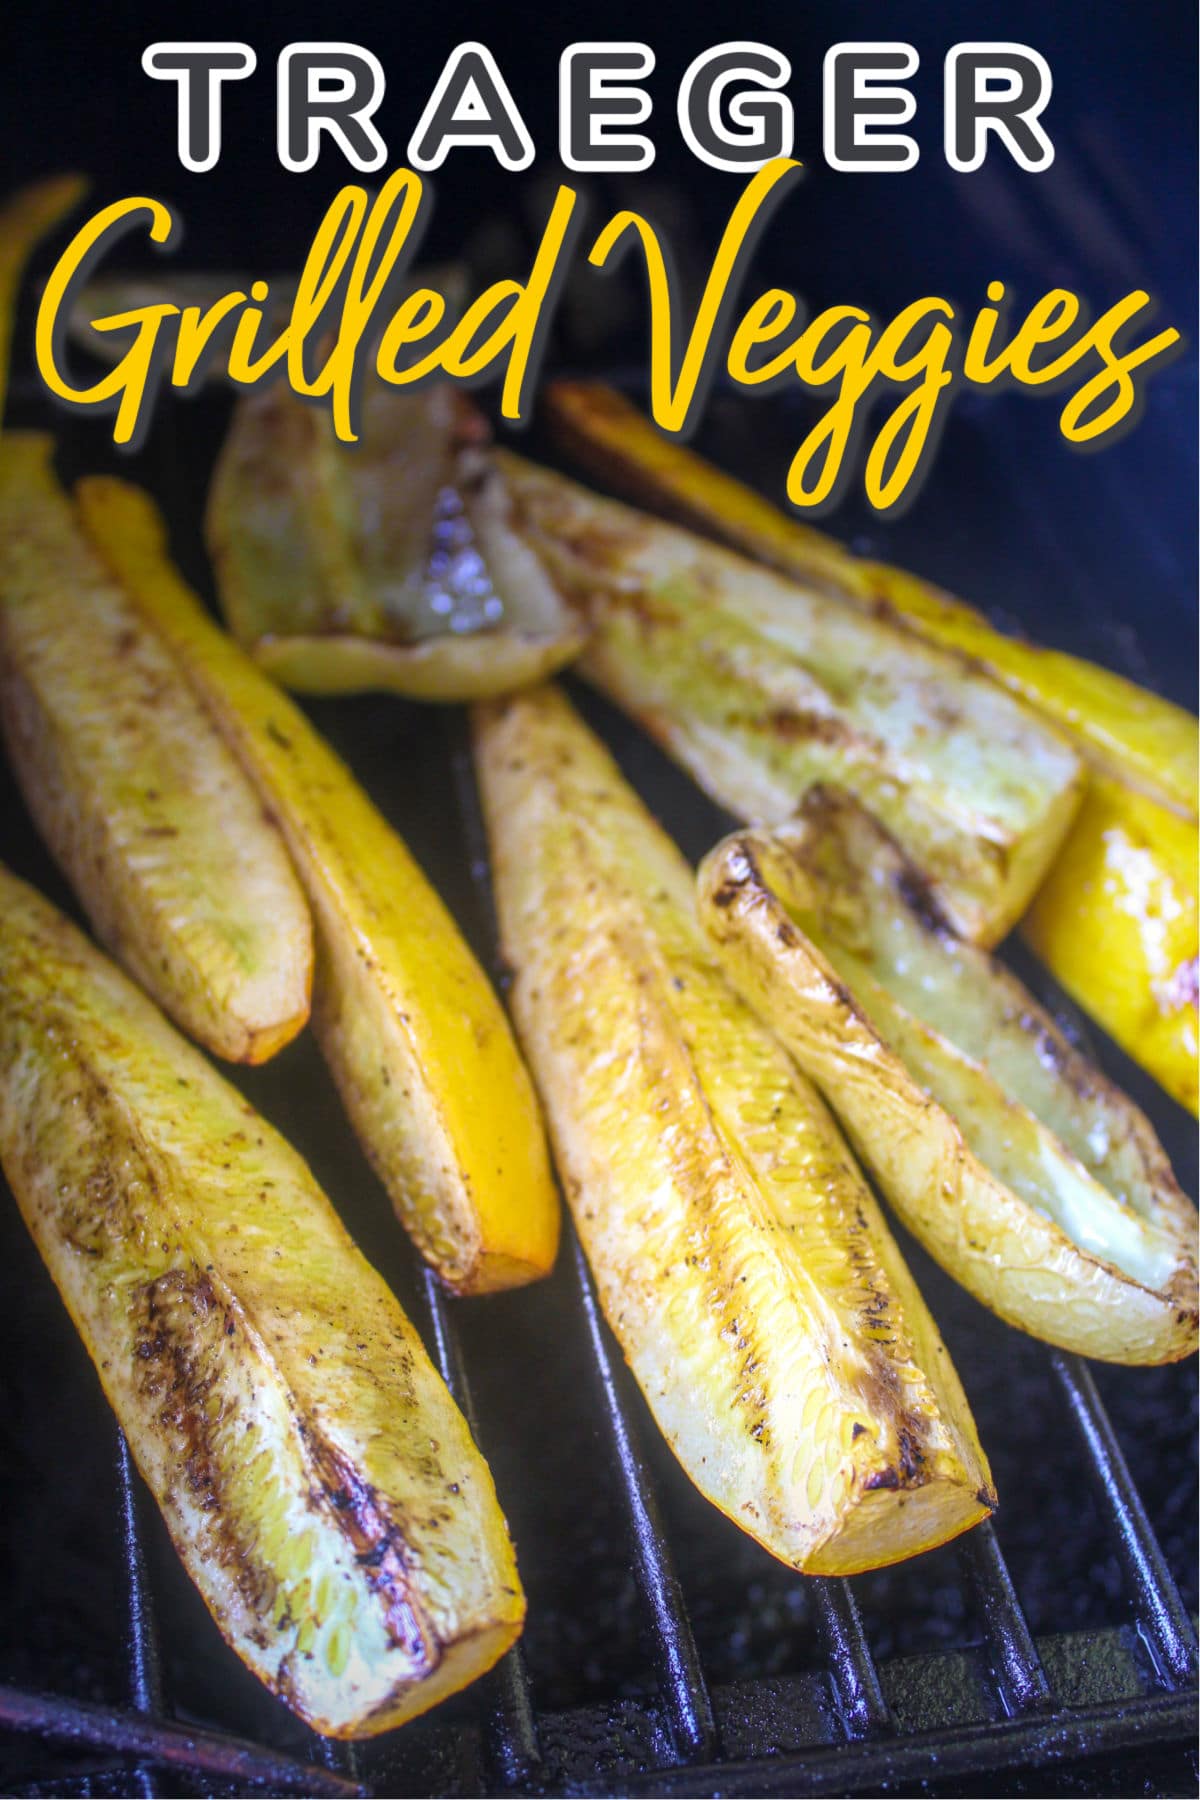 Using the Traeger to grill vegetables is the easiest summertime side you'll find! Set it and forget it - plus the smoky flavor from the Traeger pellets is delicious!  via @foodhussy